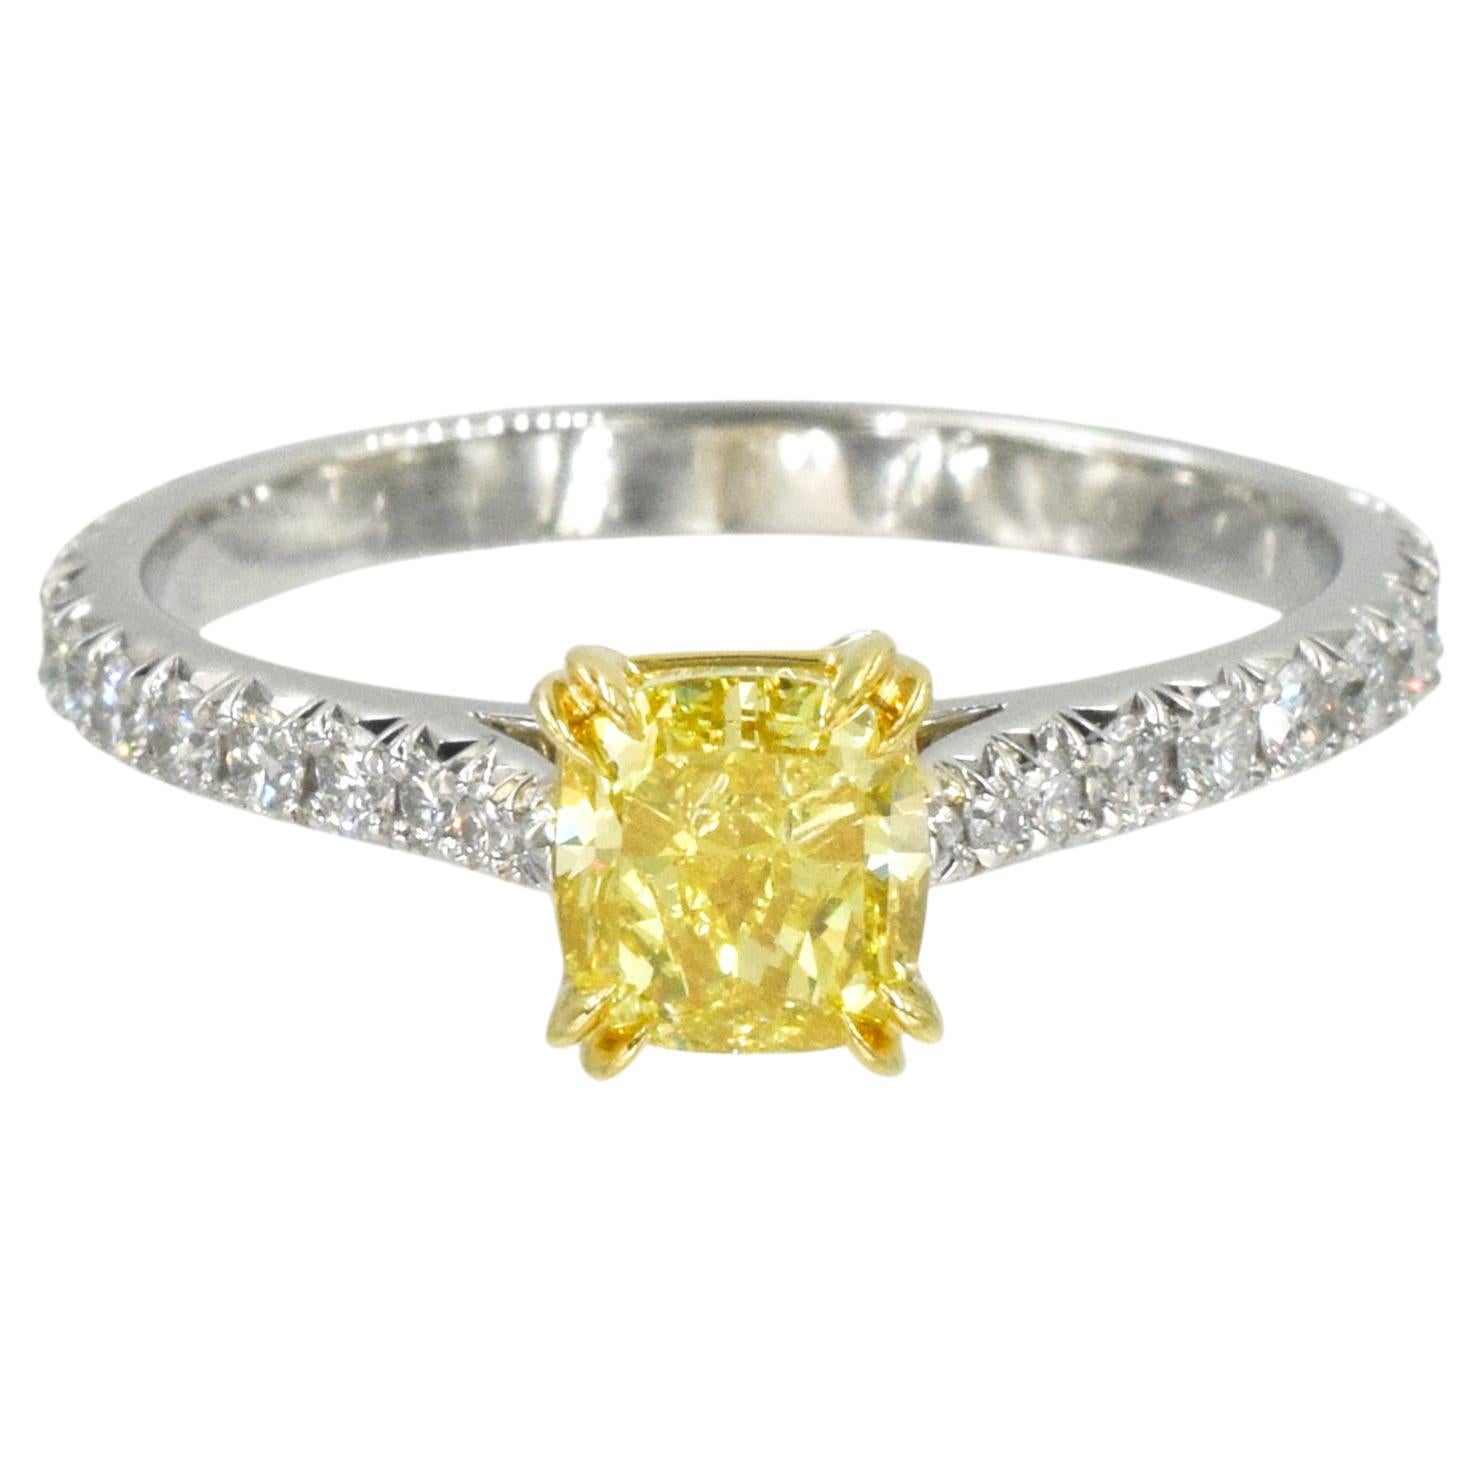 Harry Winston yellow diamond ring in platinum. Center of the ring features 1.03carat fancy intense yellow cushion modified brilliant cut diamond, clarity VVS1, GIA Certificate
 # 2203440524, set in 18k yellow gold basket, placed on a platinum band